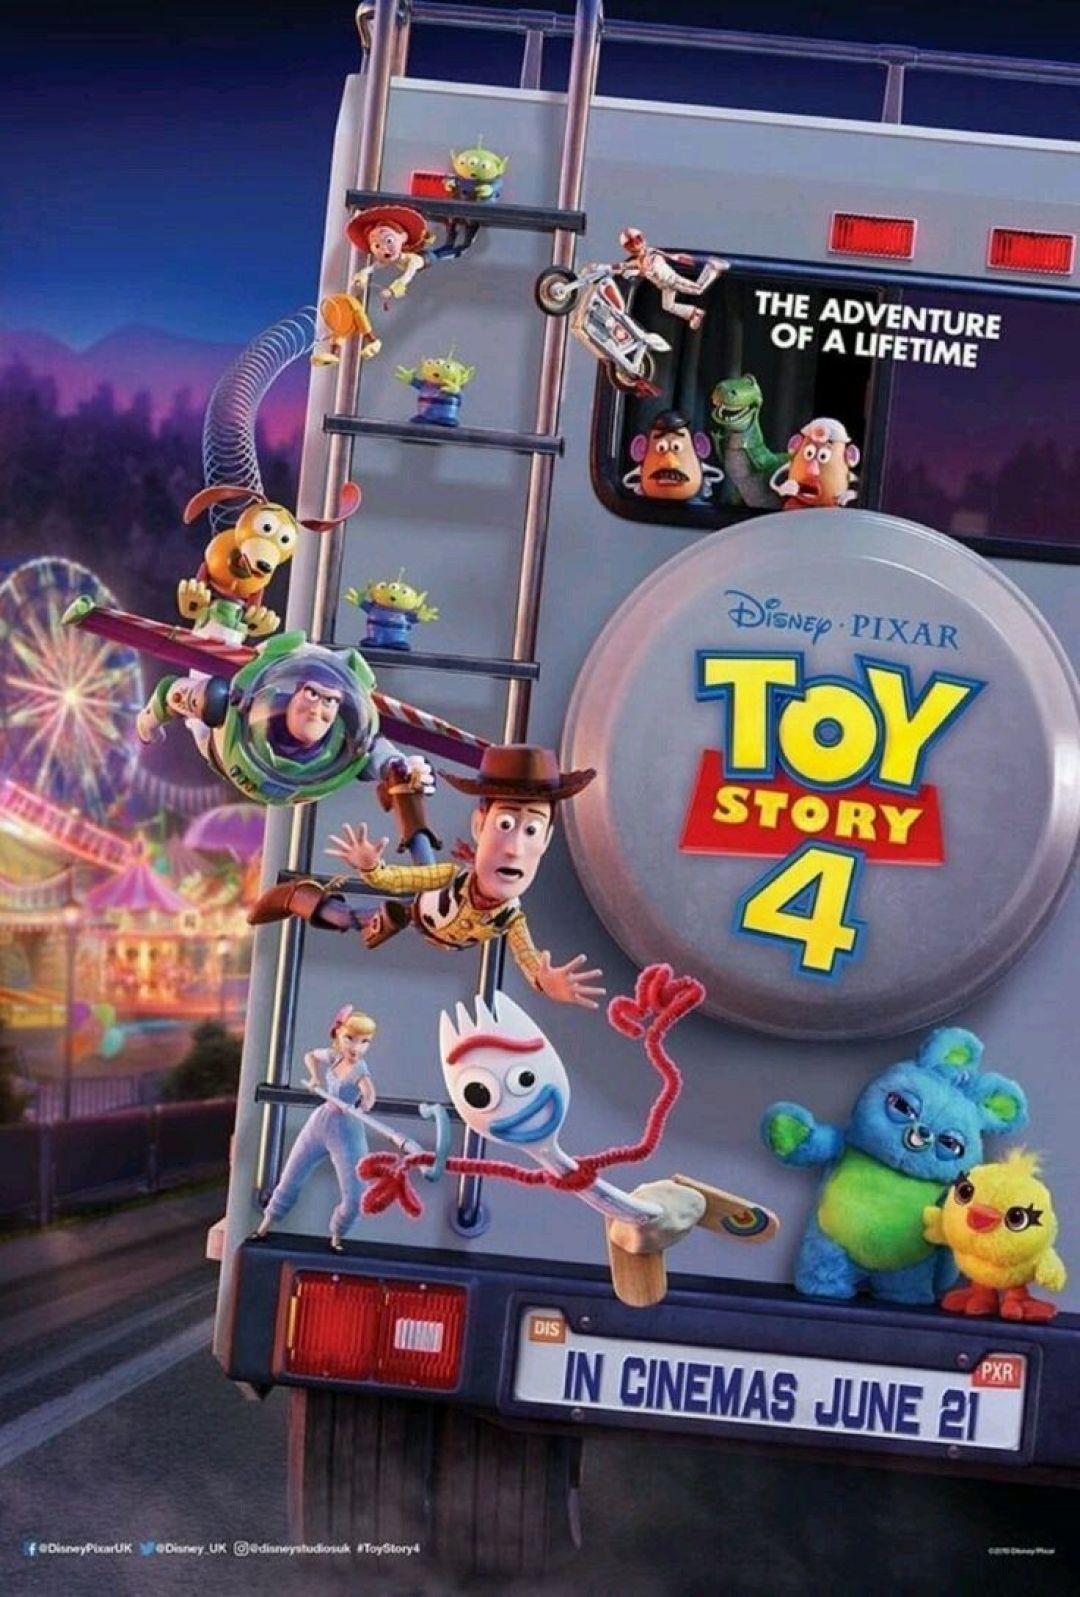 ✓[100+] toy story wallpaper - Android, iPhone, Desktop HD Backgrounds /  Wallpapers (1080p, 4k) (png / jpg) (2023)